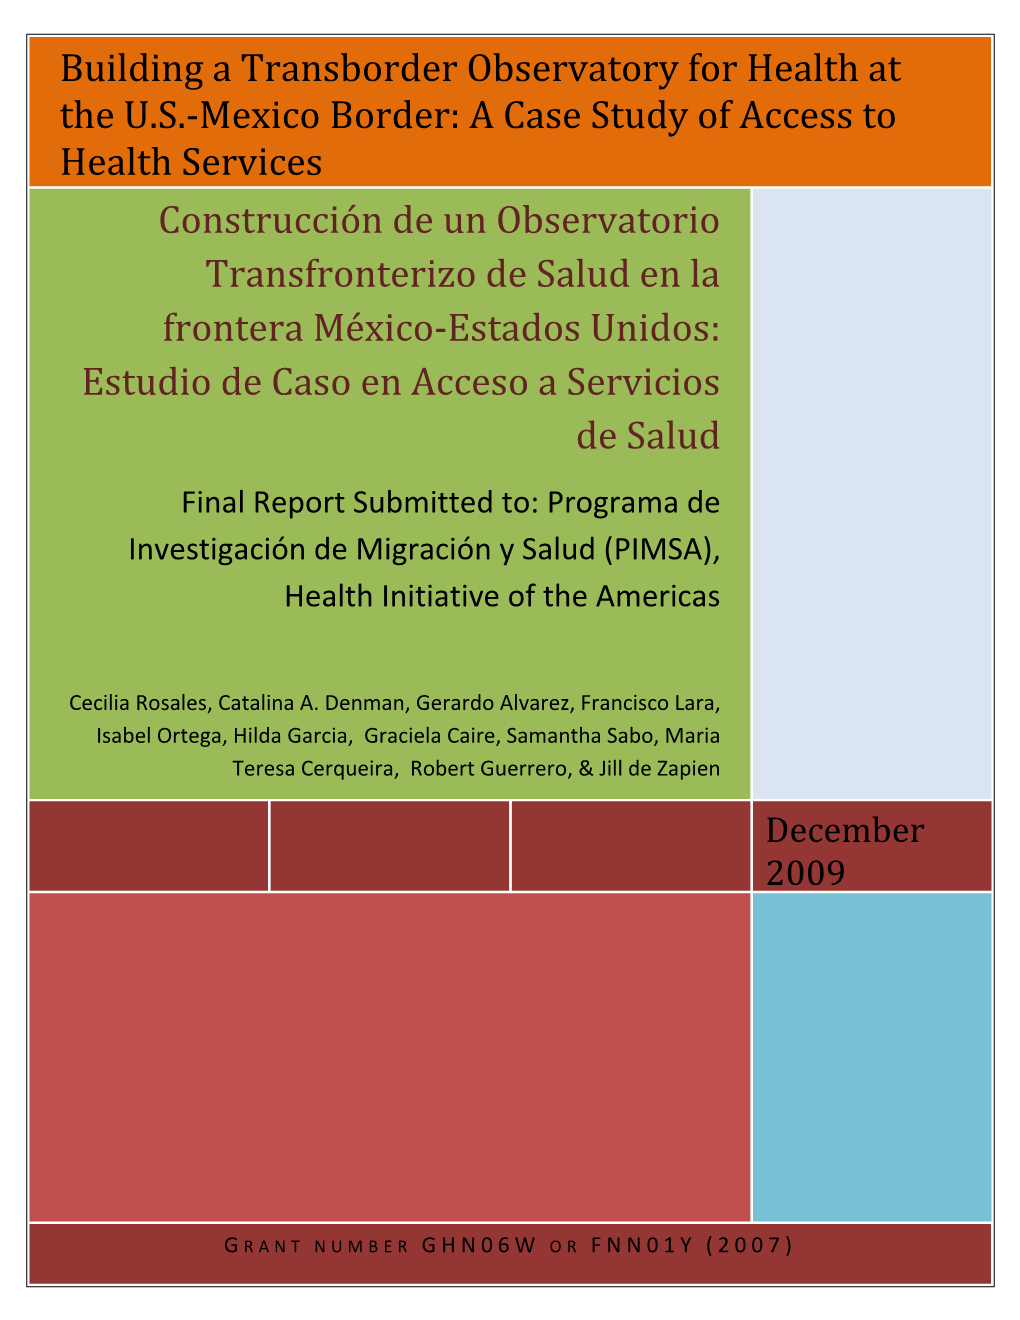 “Building a Transborder Observatory for Health at the U.S.-Mexico Border